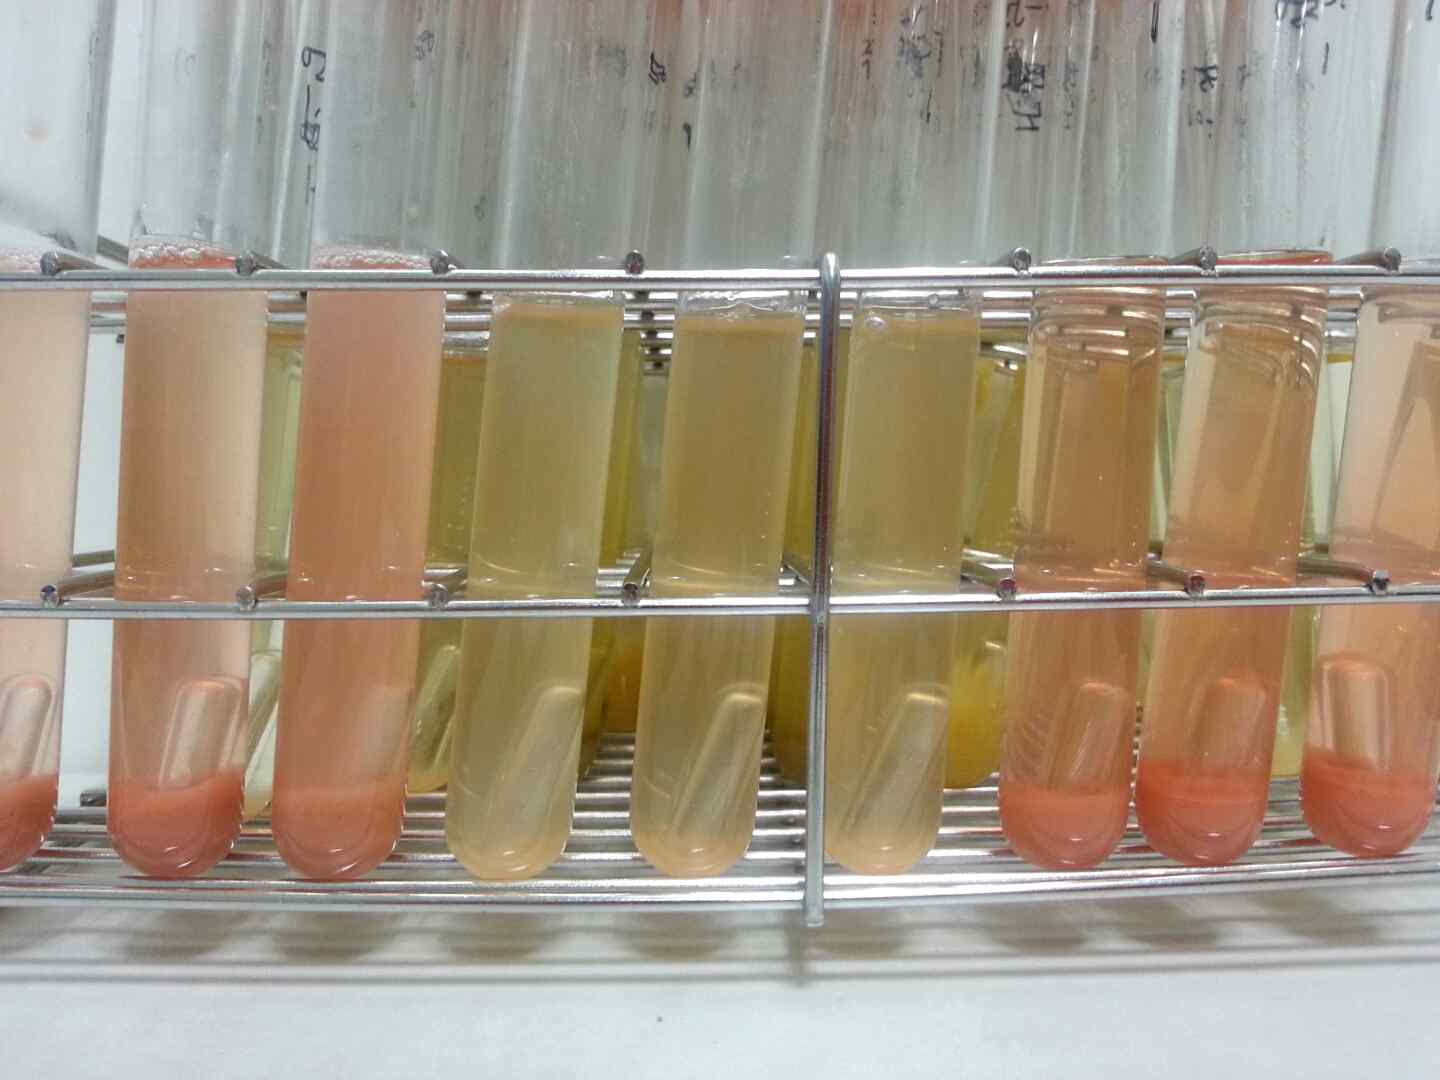 coliform group qualitative test after and before treatment at 550 MPa for 5 min